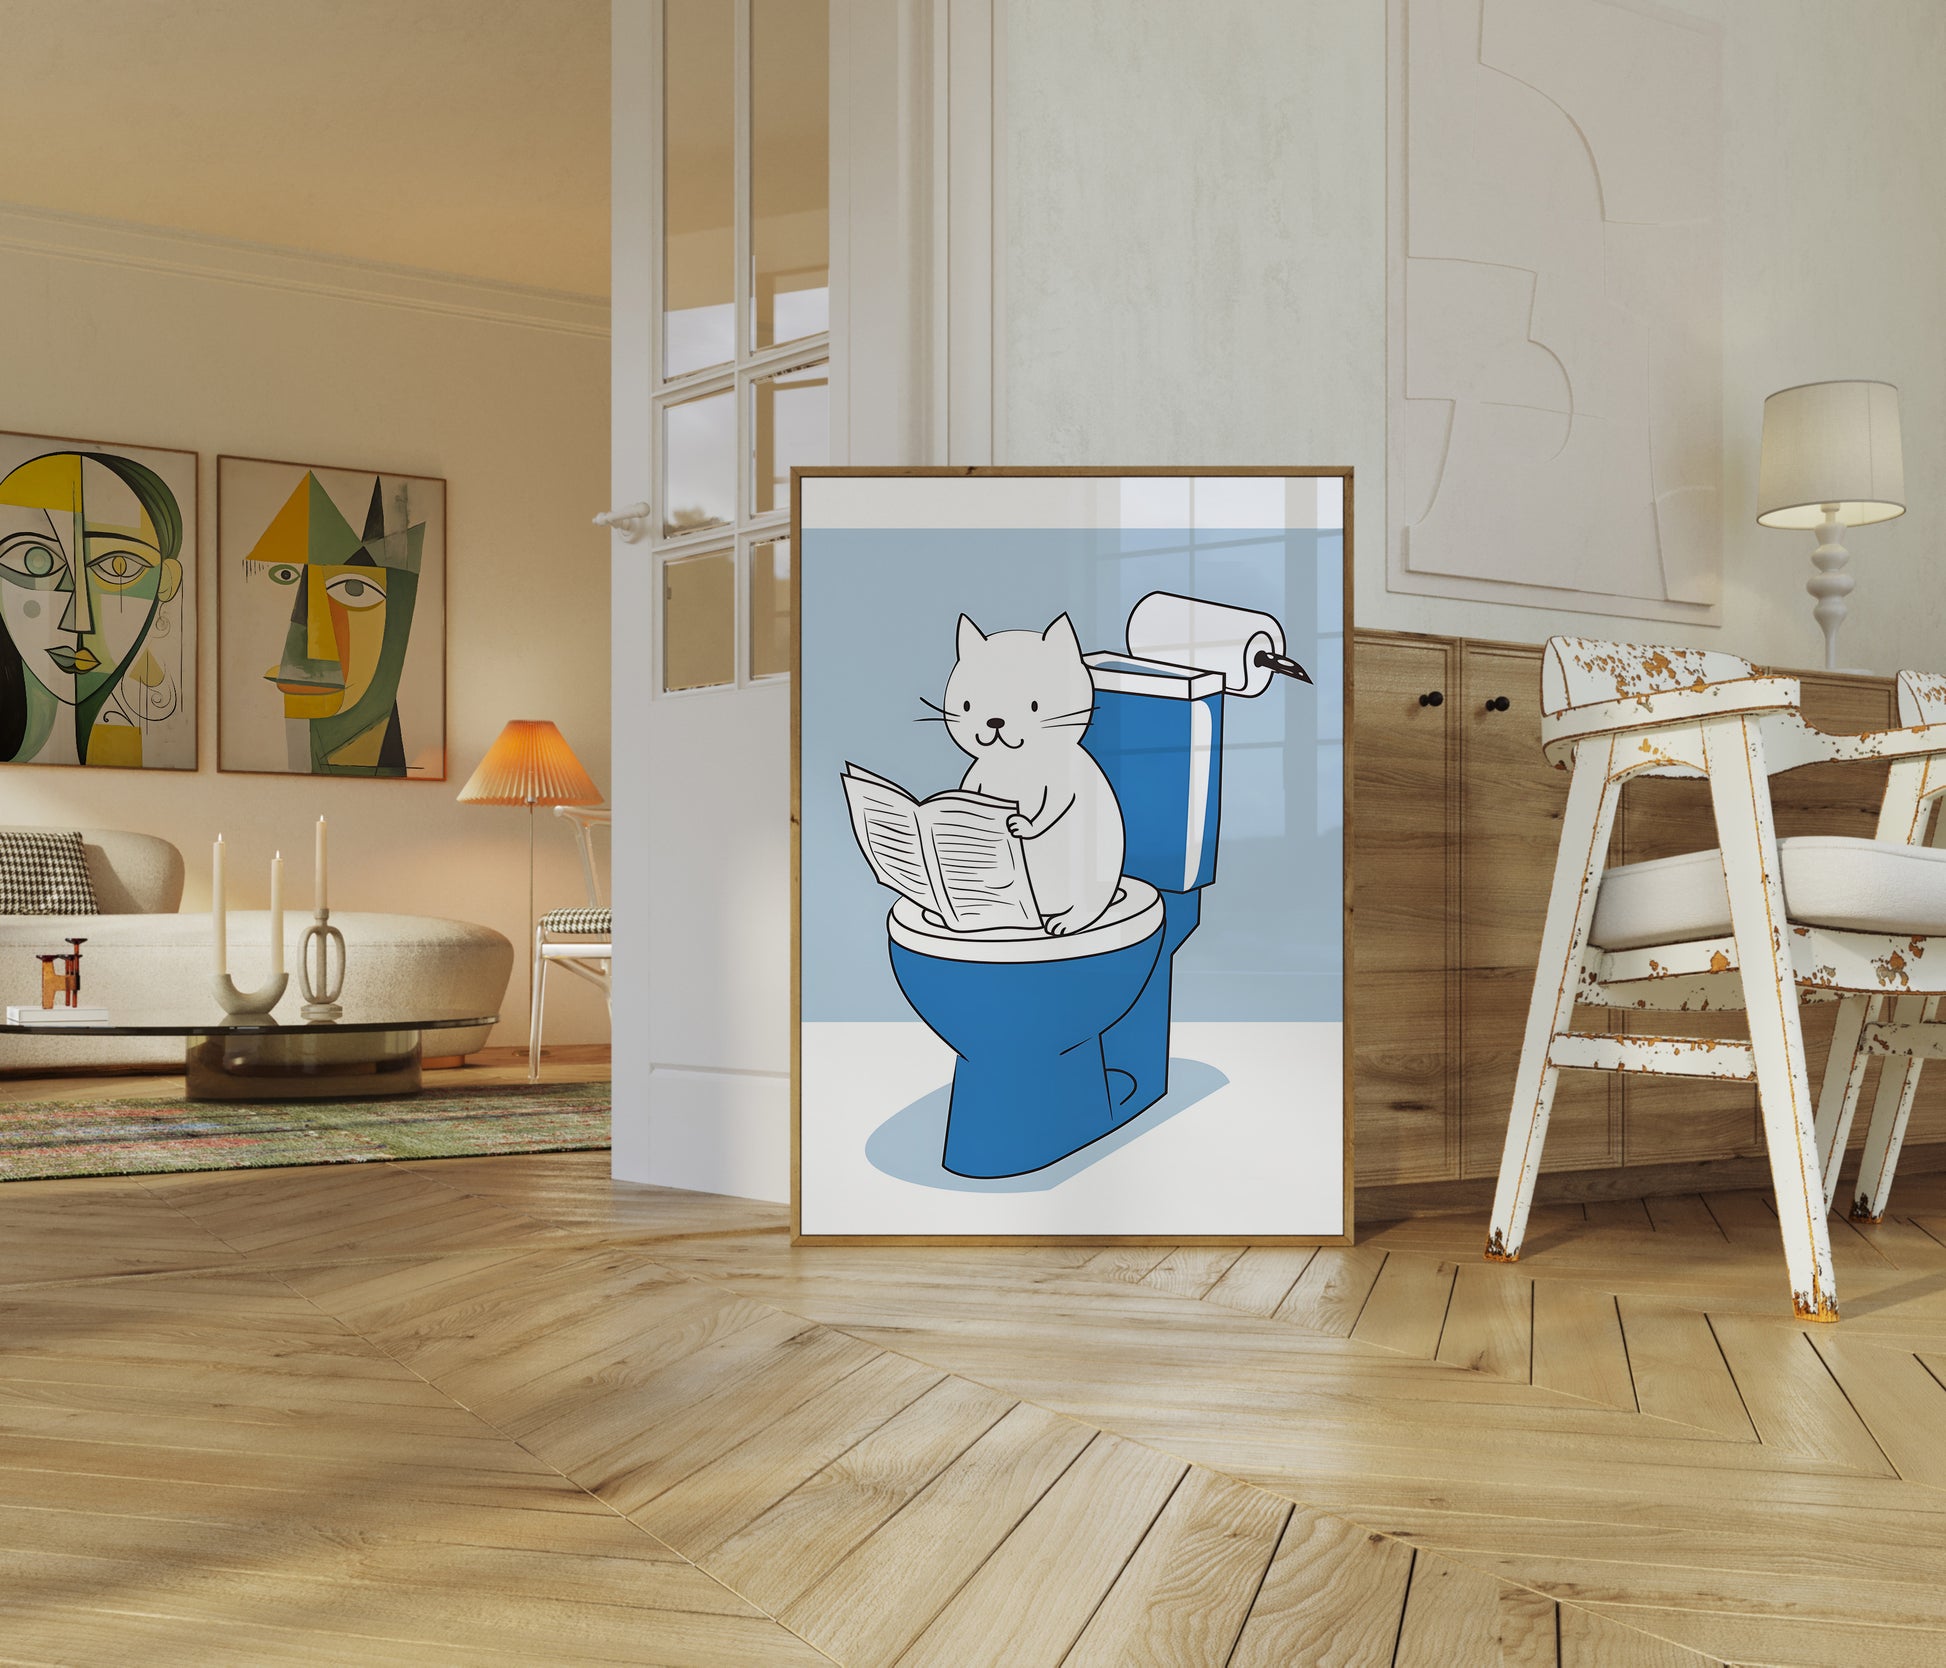 Illustration of a reading cat in a modern living room setting.